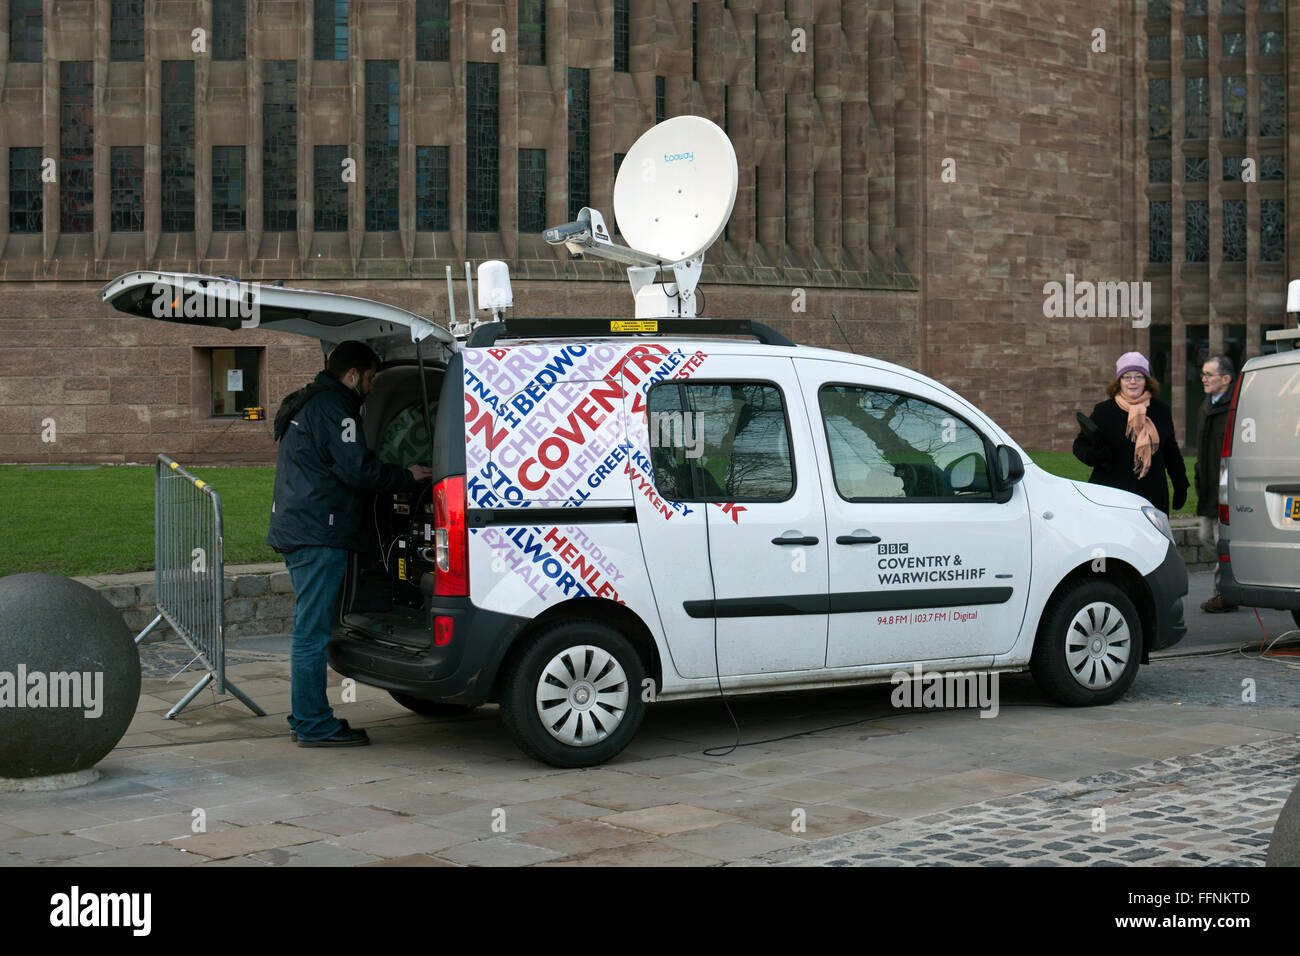 BBC Coventry and Warwickshire local radio transmission vehicle, Coventry, UK Stock Photo